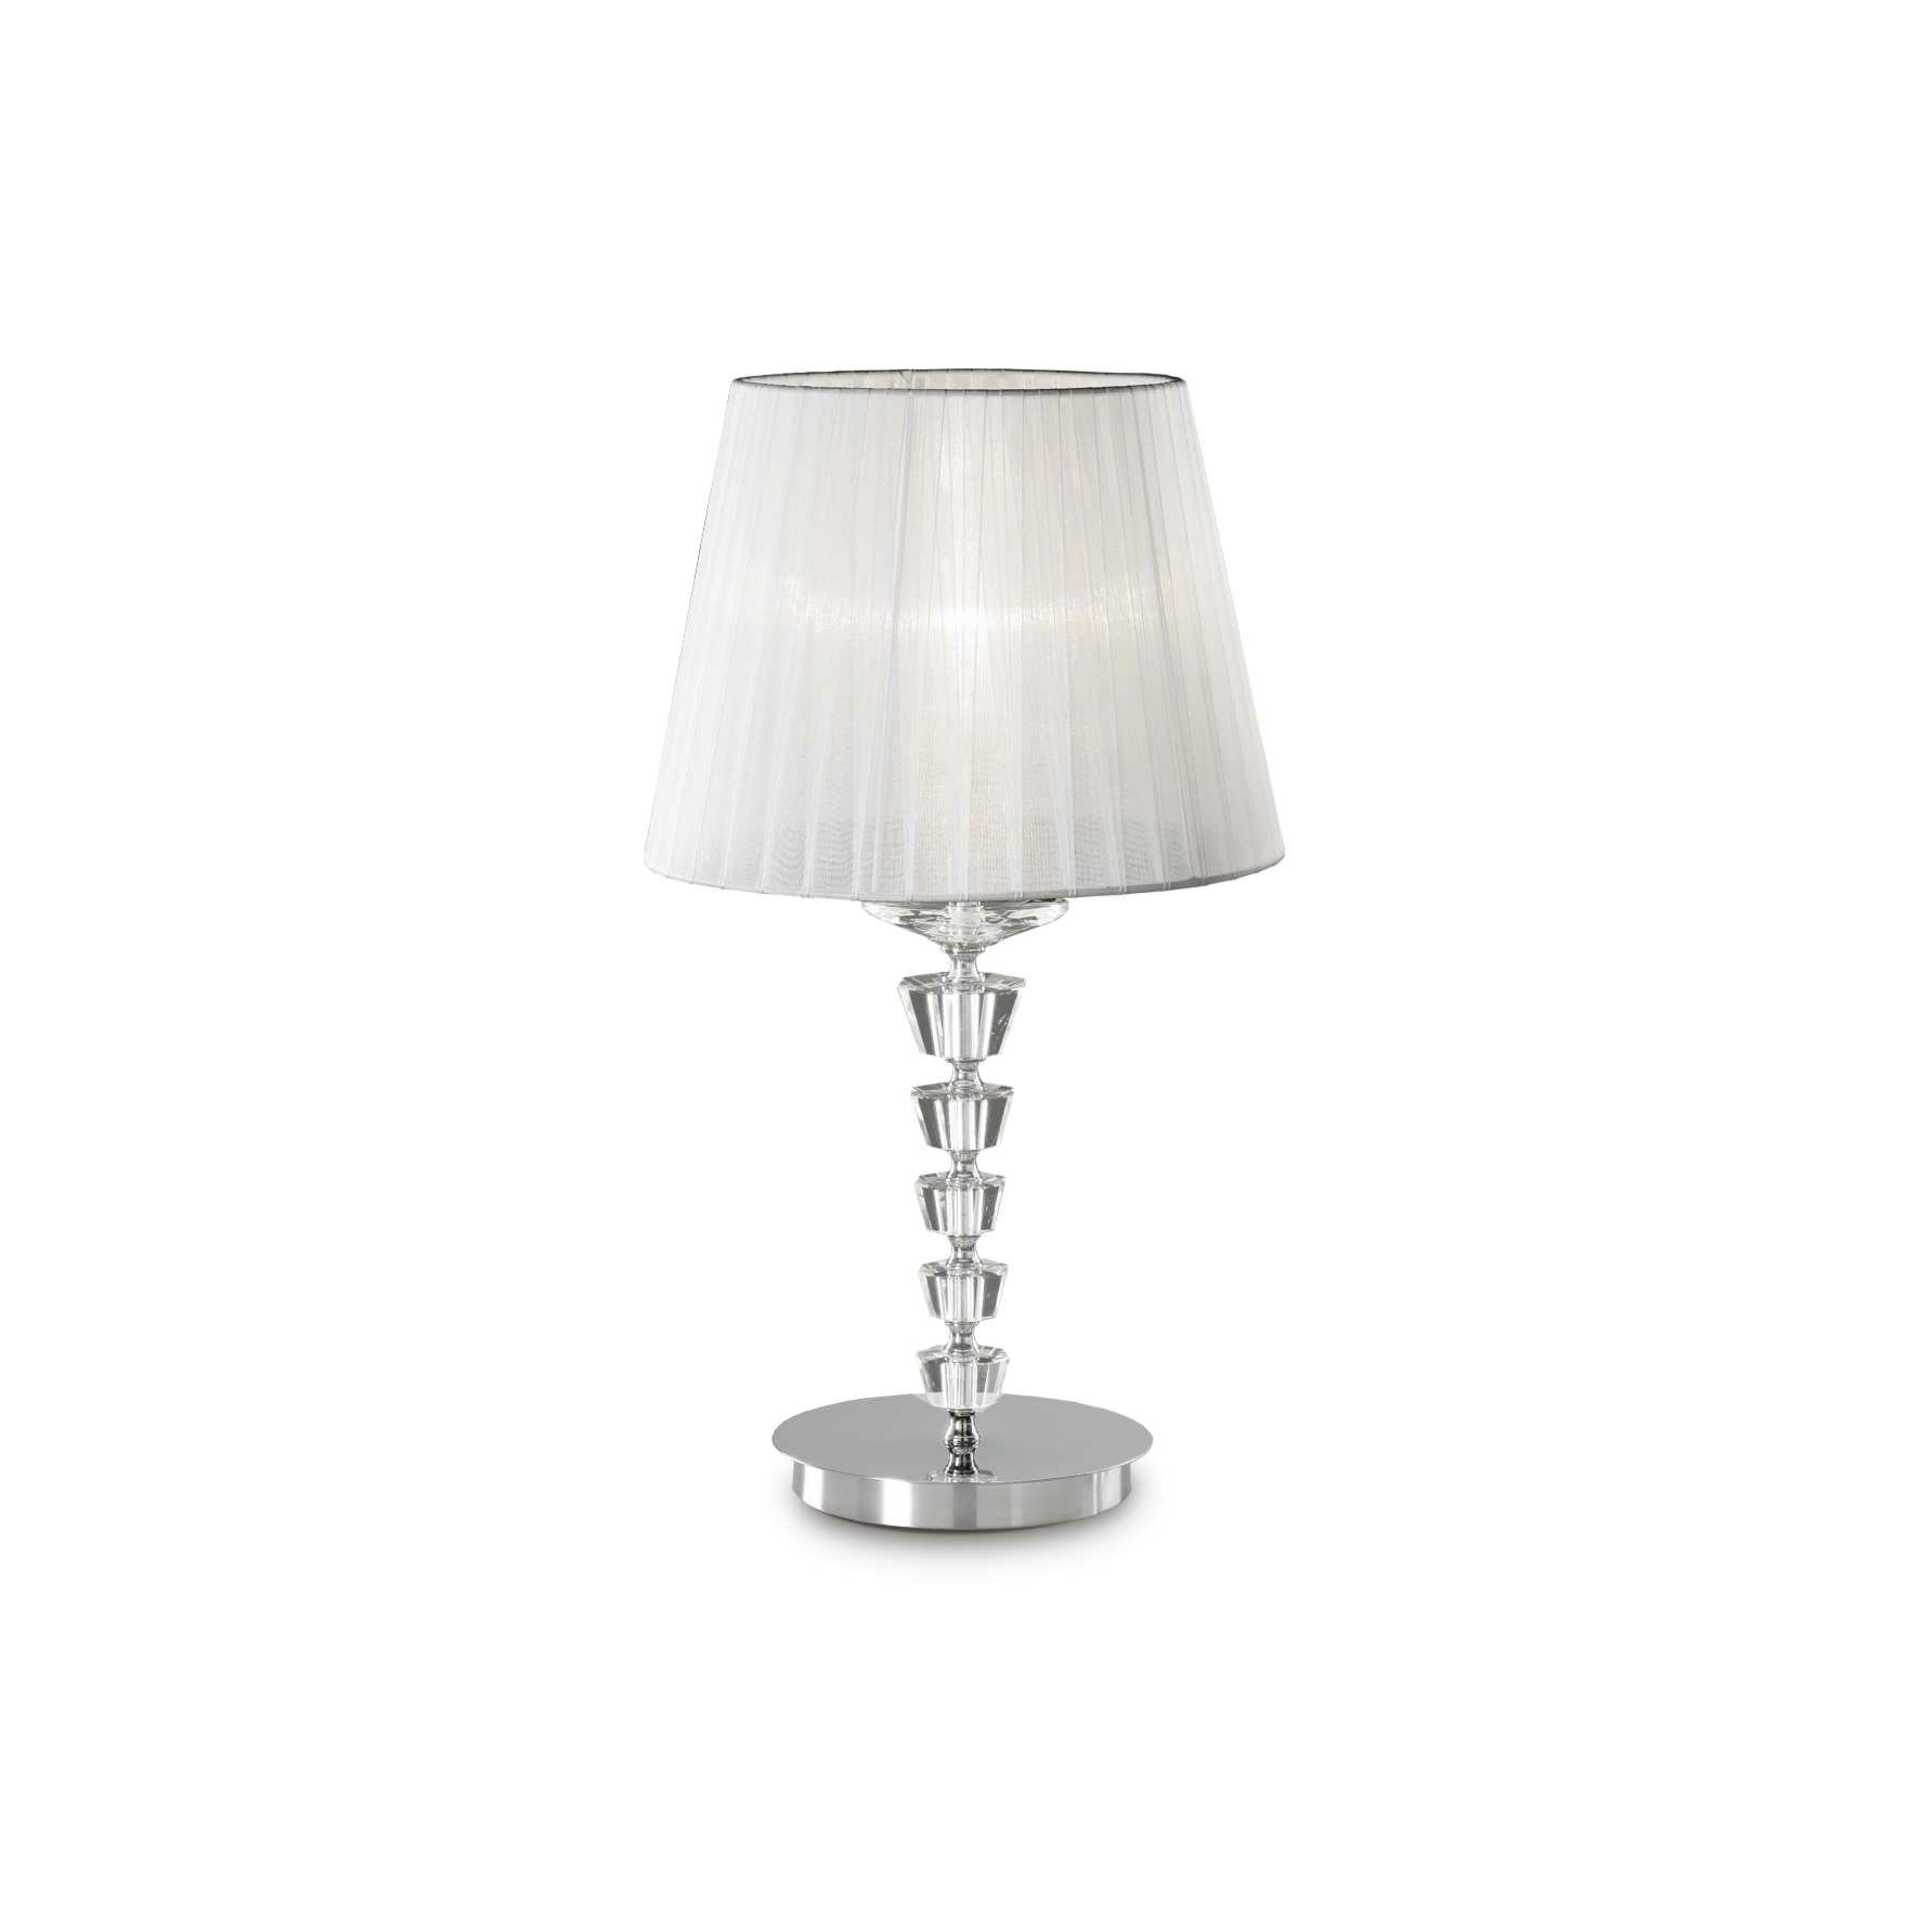 Ideal Lux PEGASO TL1 BIG SMALL LAMPA STOLNÍ 059259